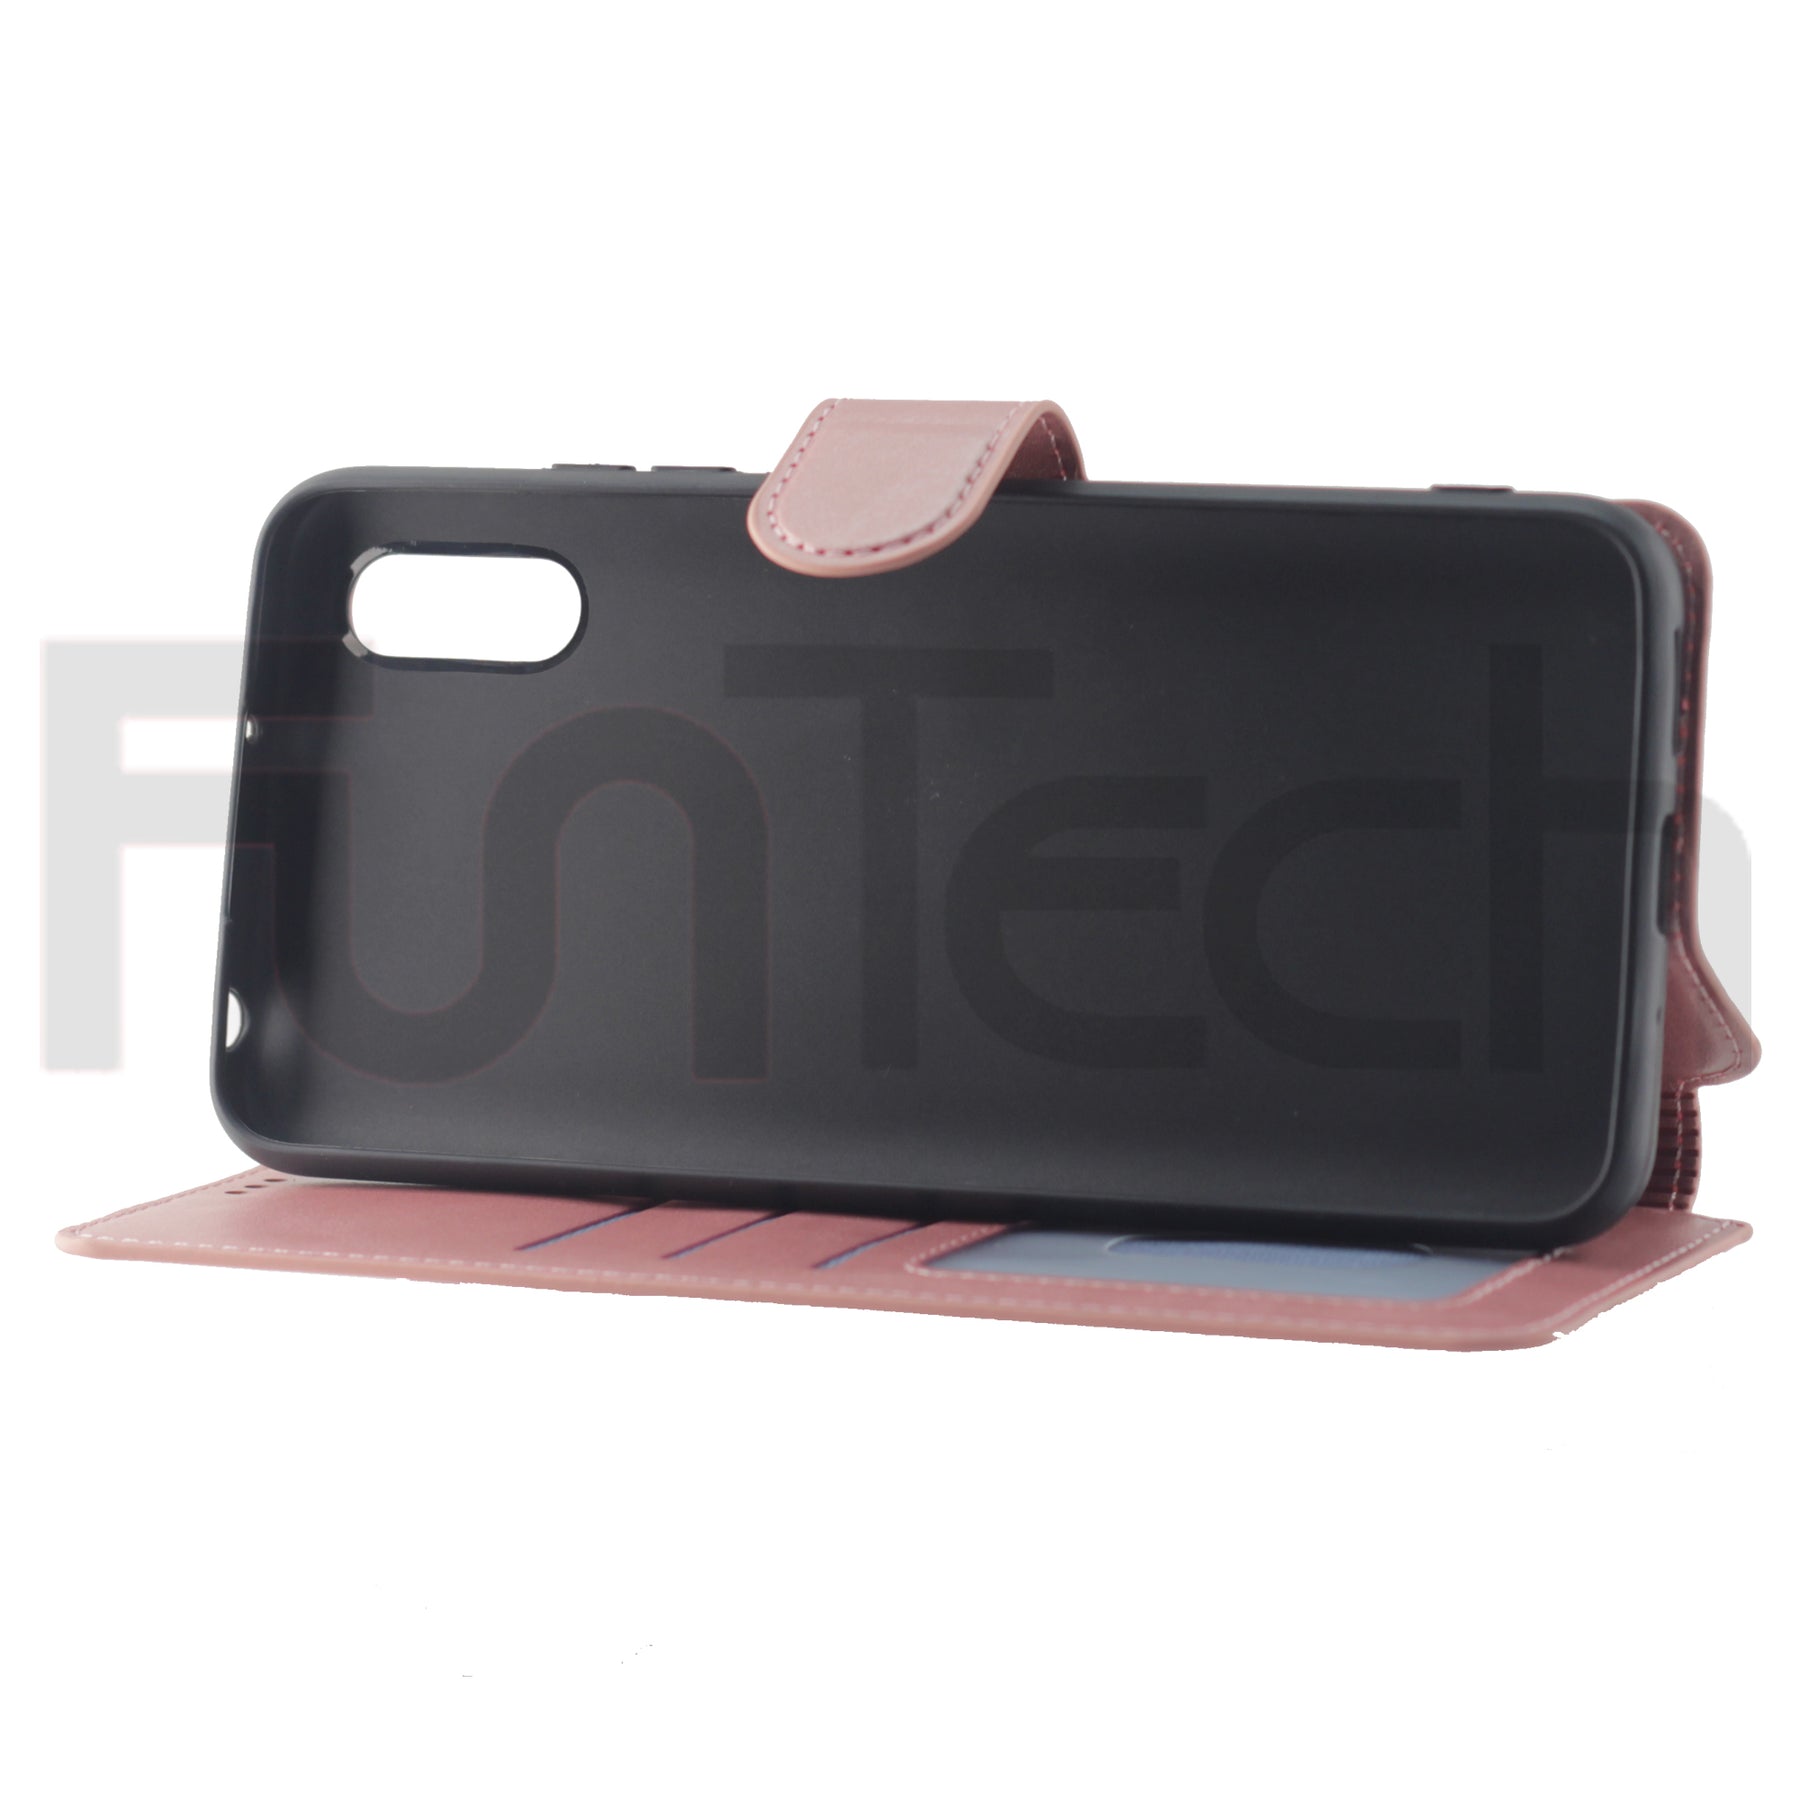 Xiaomi, Redmi 9AT, Leather Wallet Case, Color Pink.